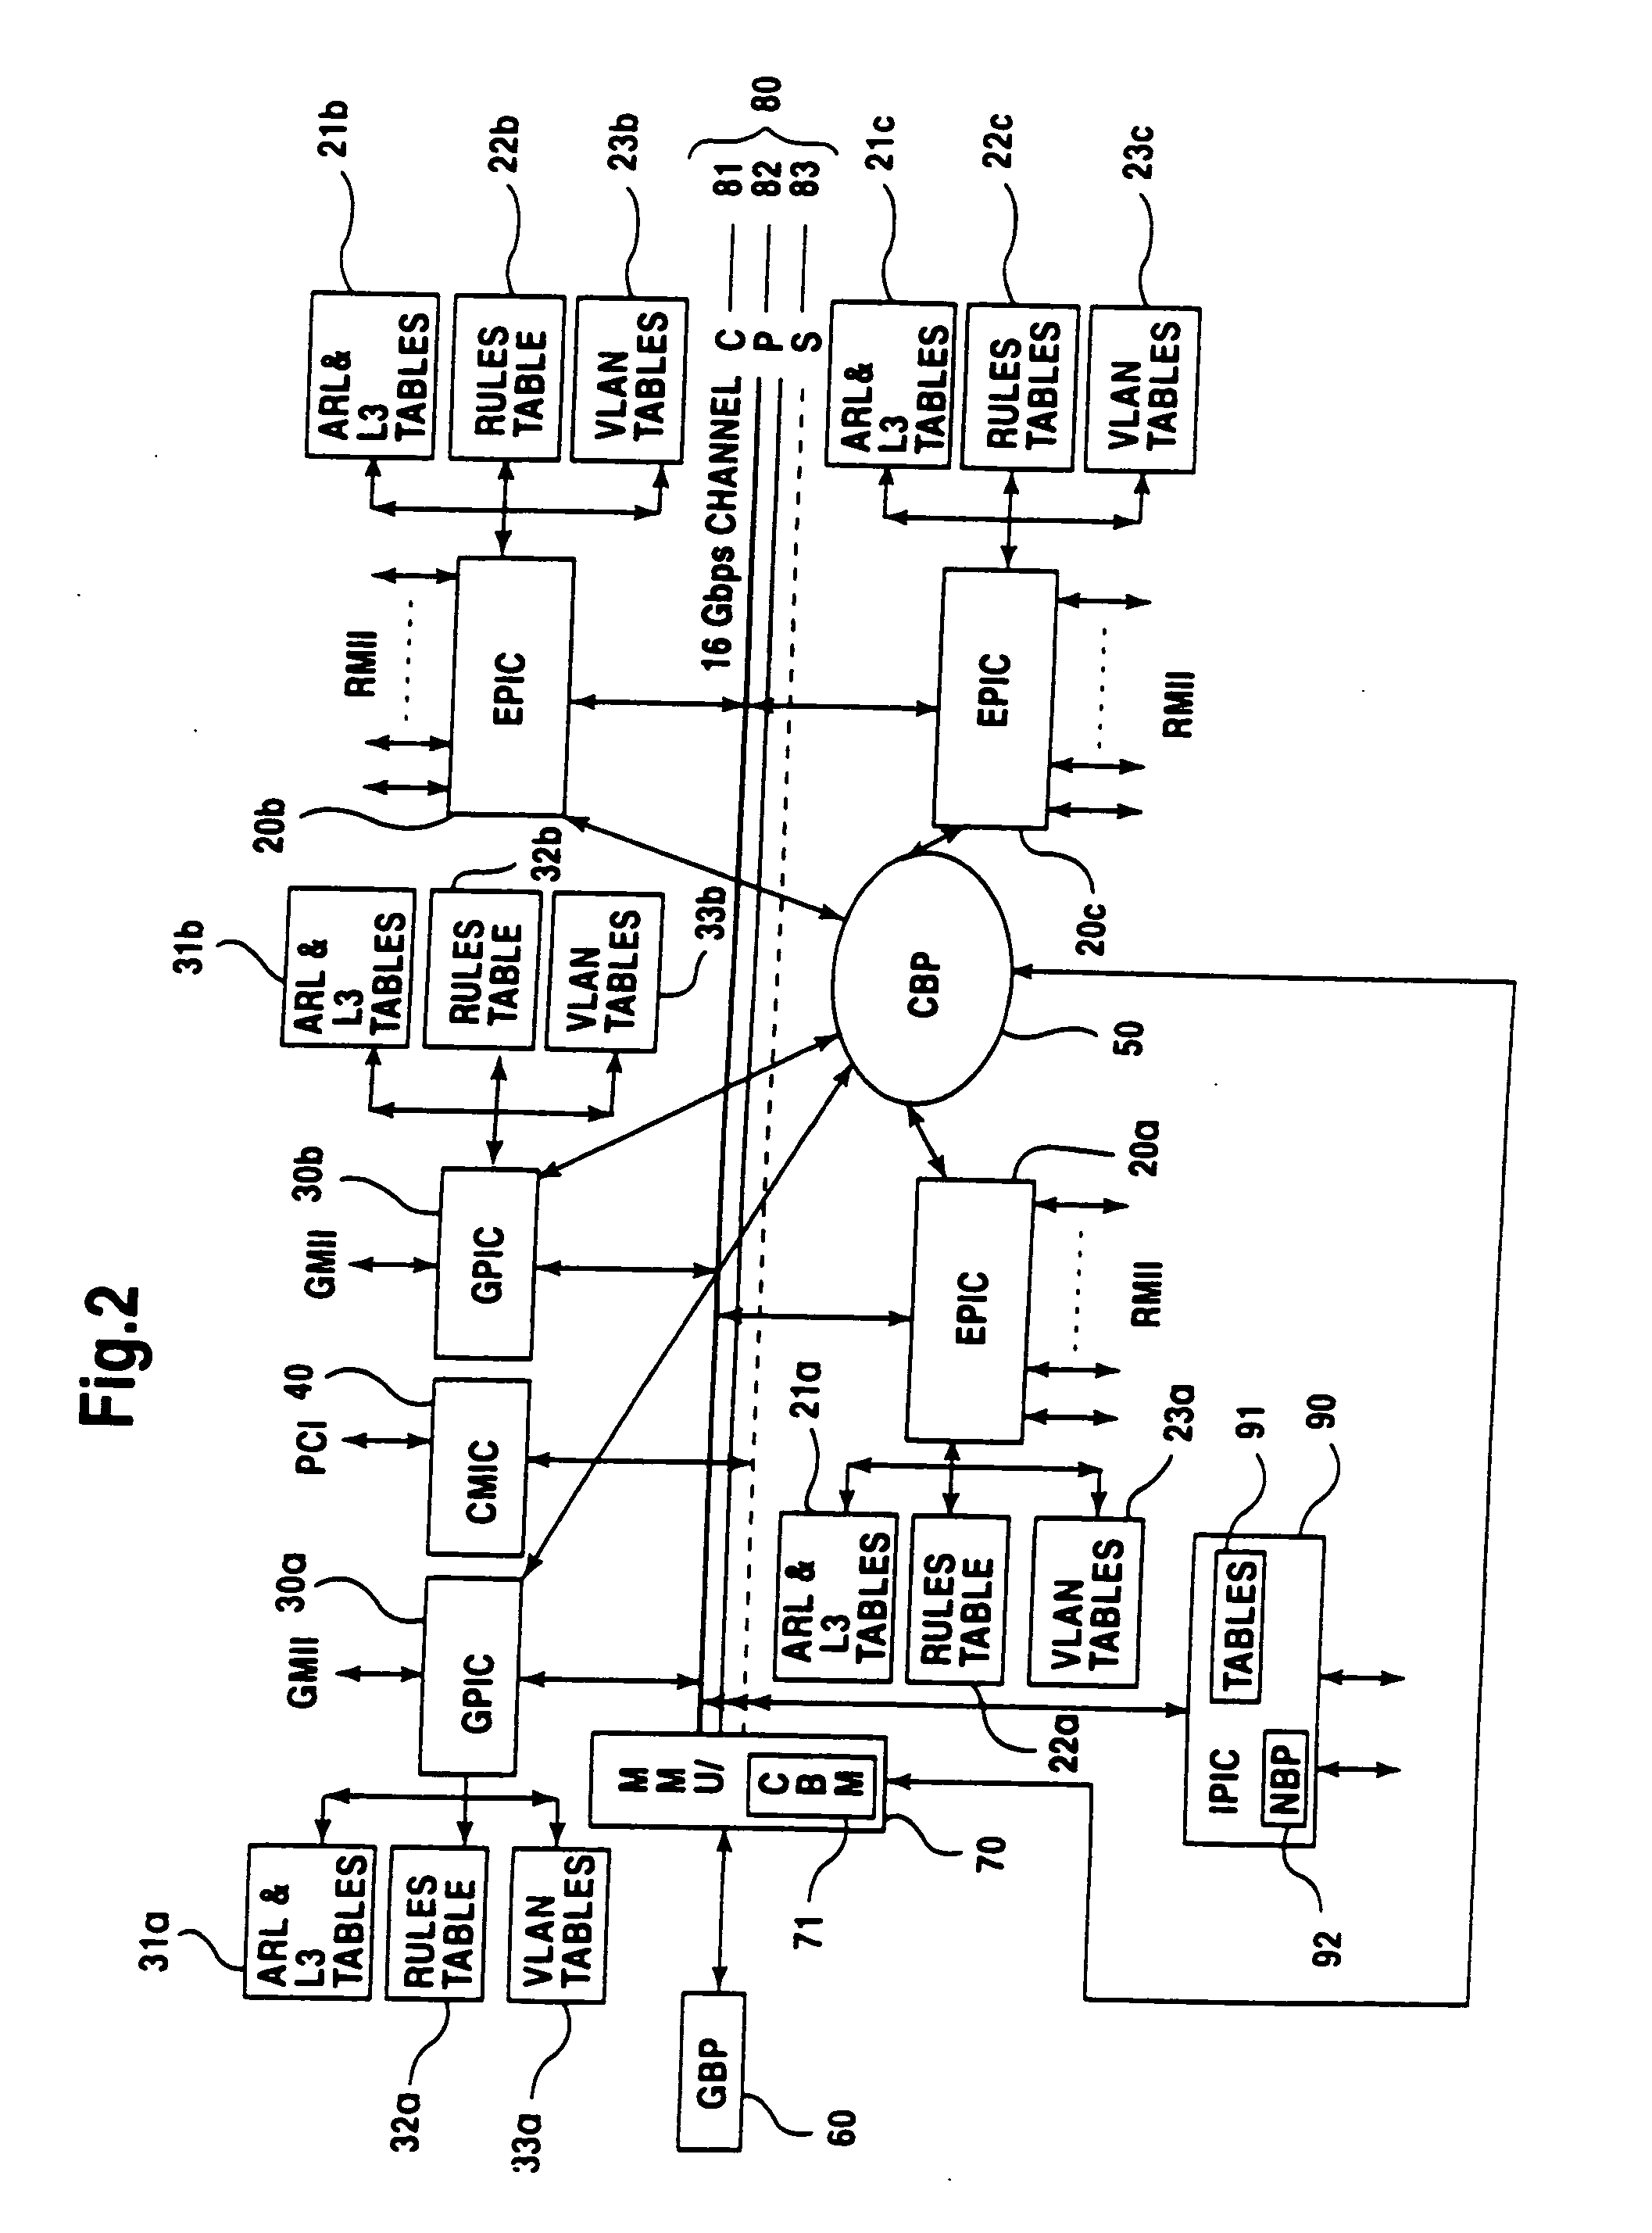 Apparatus and method for managing memory in a network switch